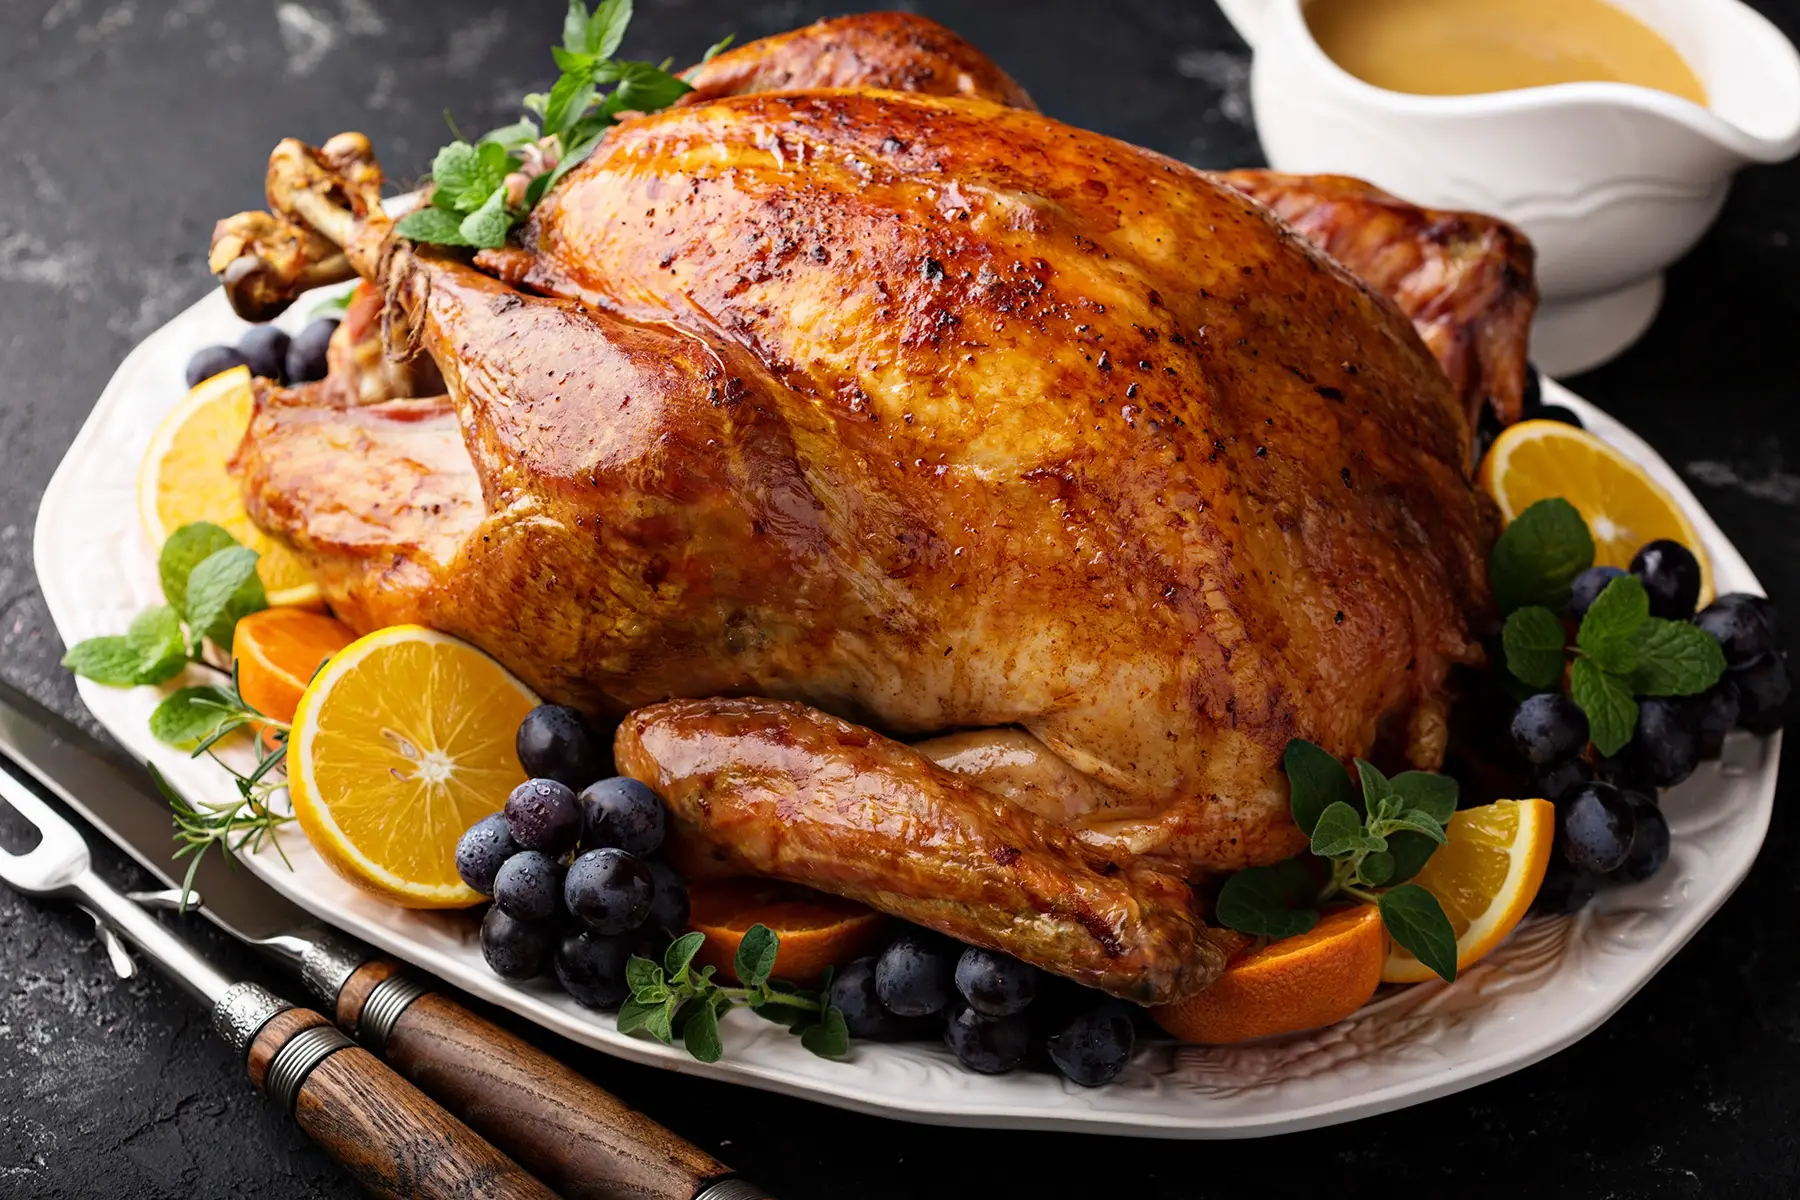 If there's one thing that almost every family agrees on, it's having a turkey as part of a Thanksgiving meal.